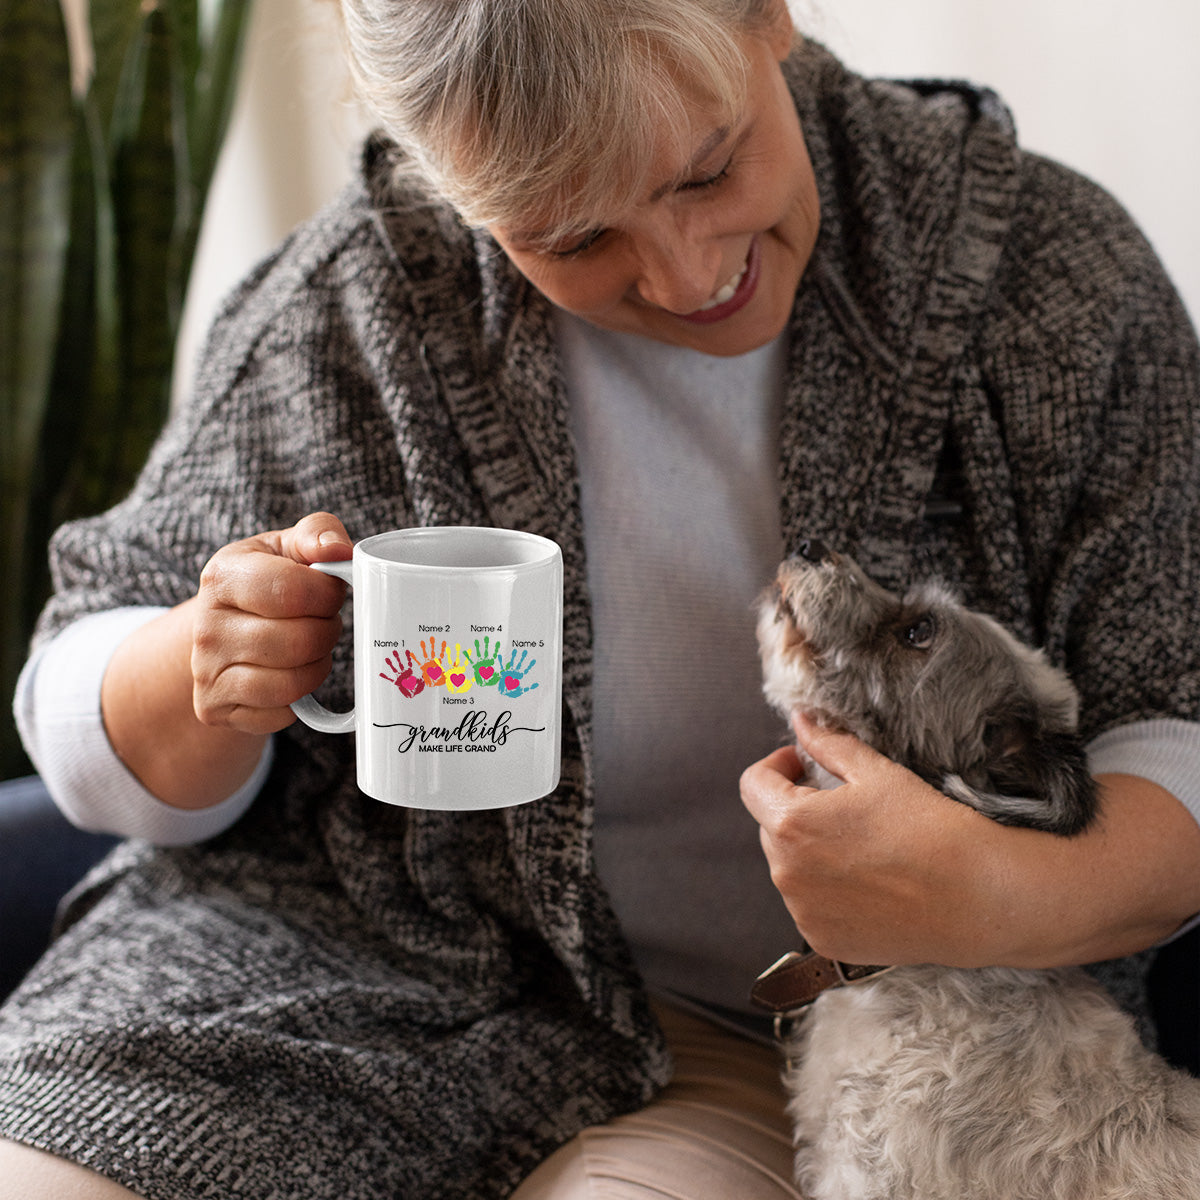 Personalised Mother's Day Mug, Nanny Gift, Best Nan Mug, Mummy Mug, Personalised Mug, New Nanny Mug , First Mothers Day, New Mum Gift, Grandkids Make Life Grand